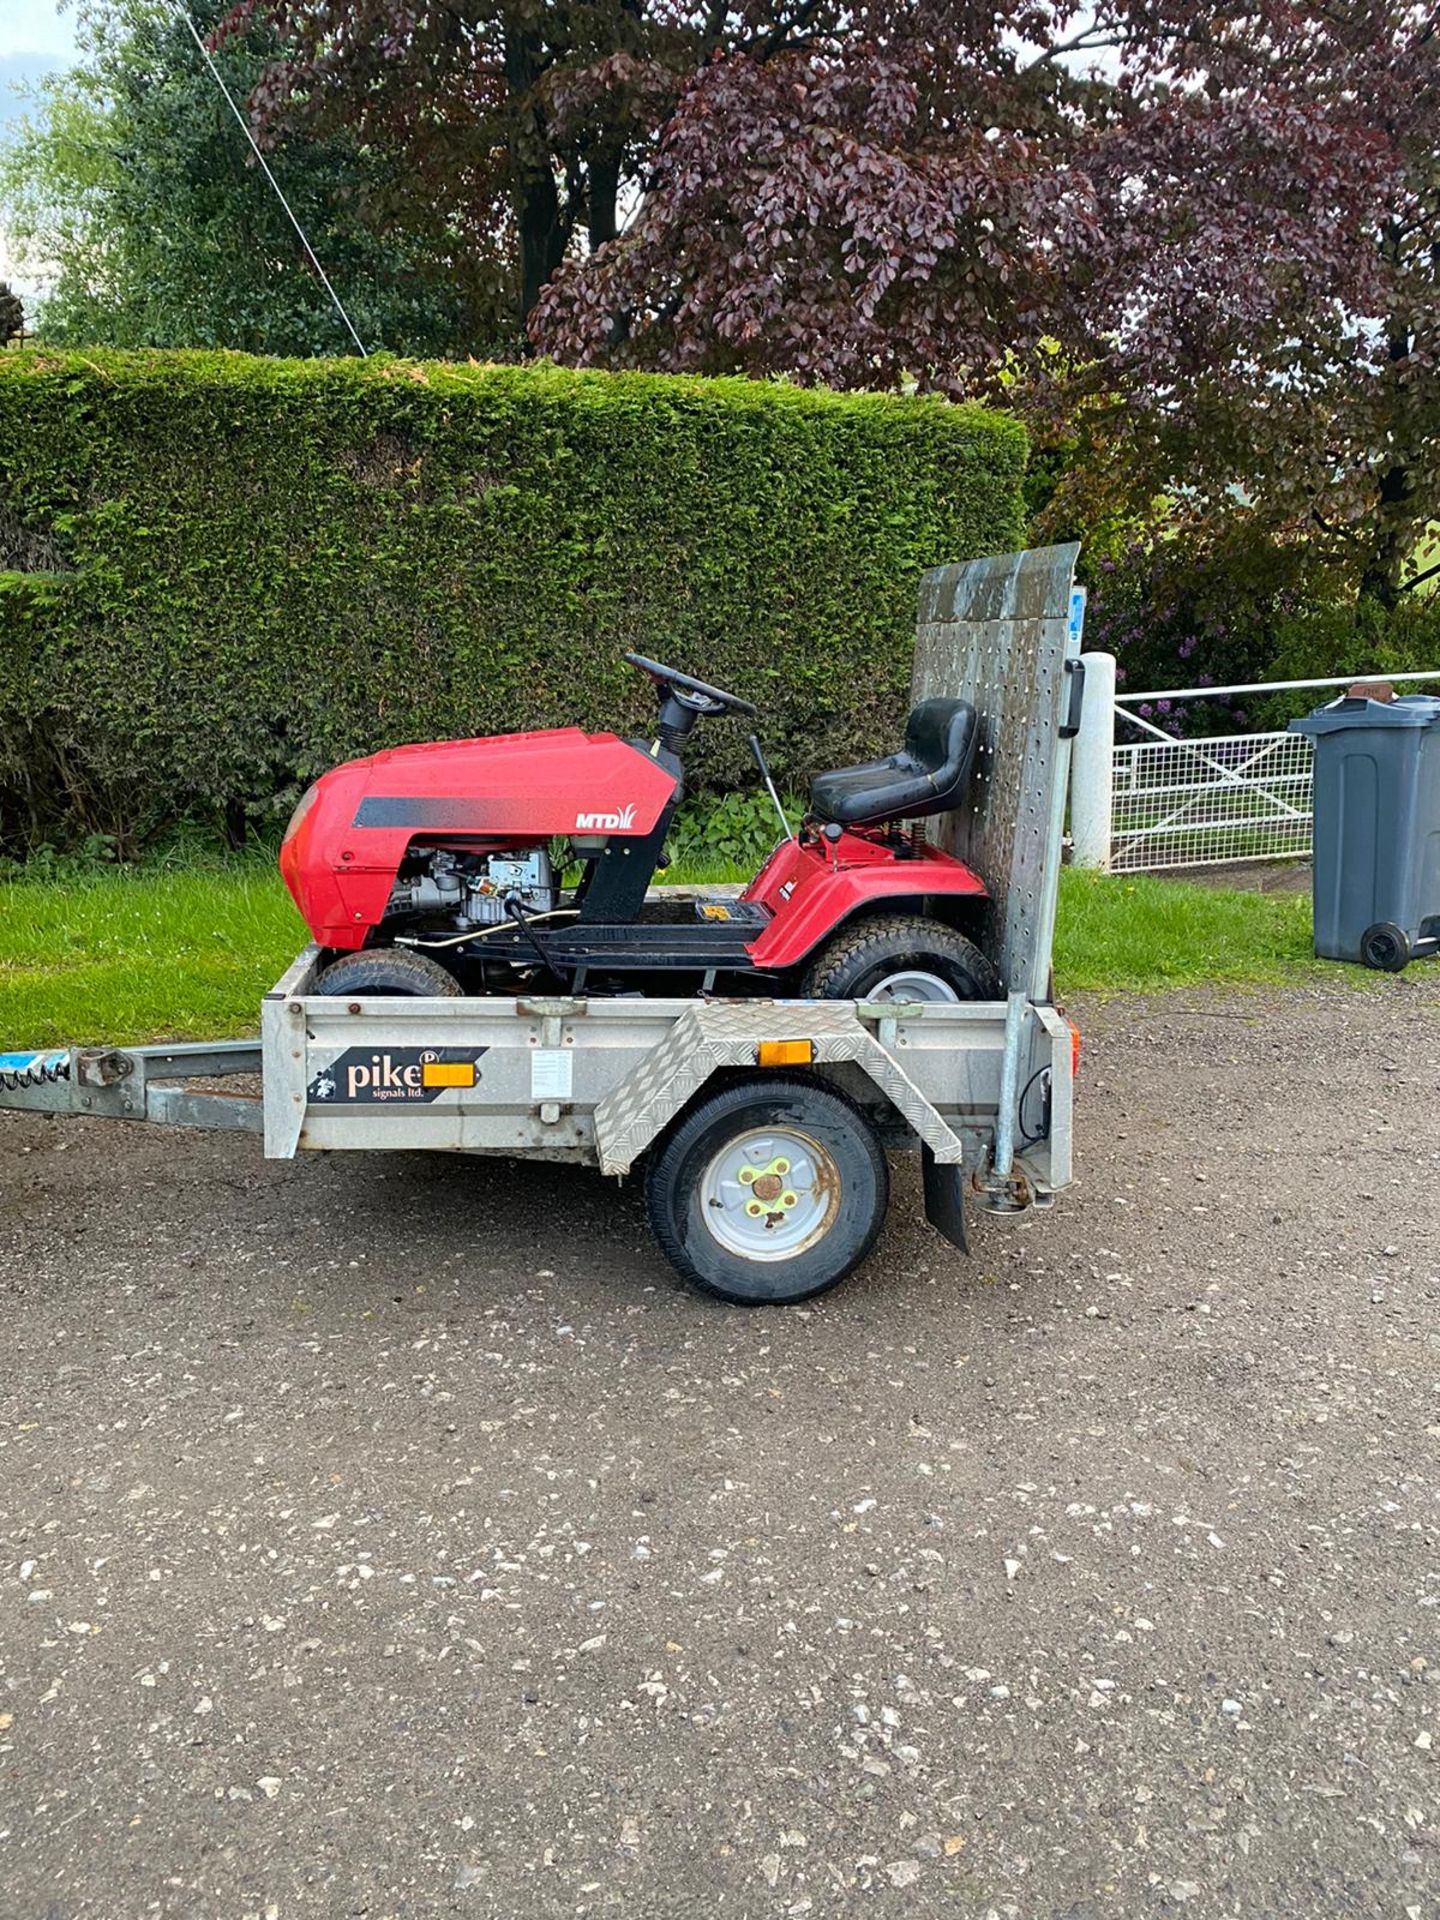 SINGLE AXLE PLANT TRAILER COMES WITH MTD RIDE ON LAWN MOWER, RUNS DRIVES AND CUTS *NO VAT* - Image 3 of 8